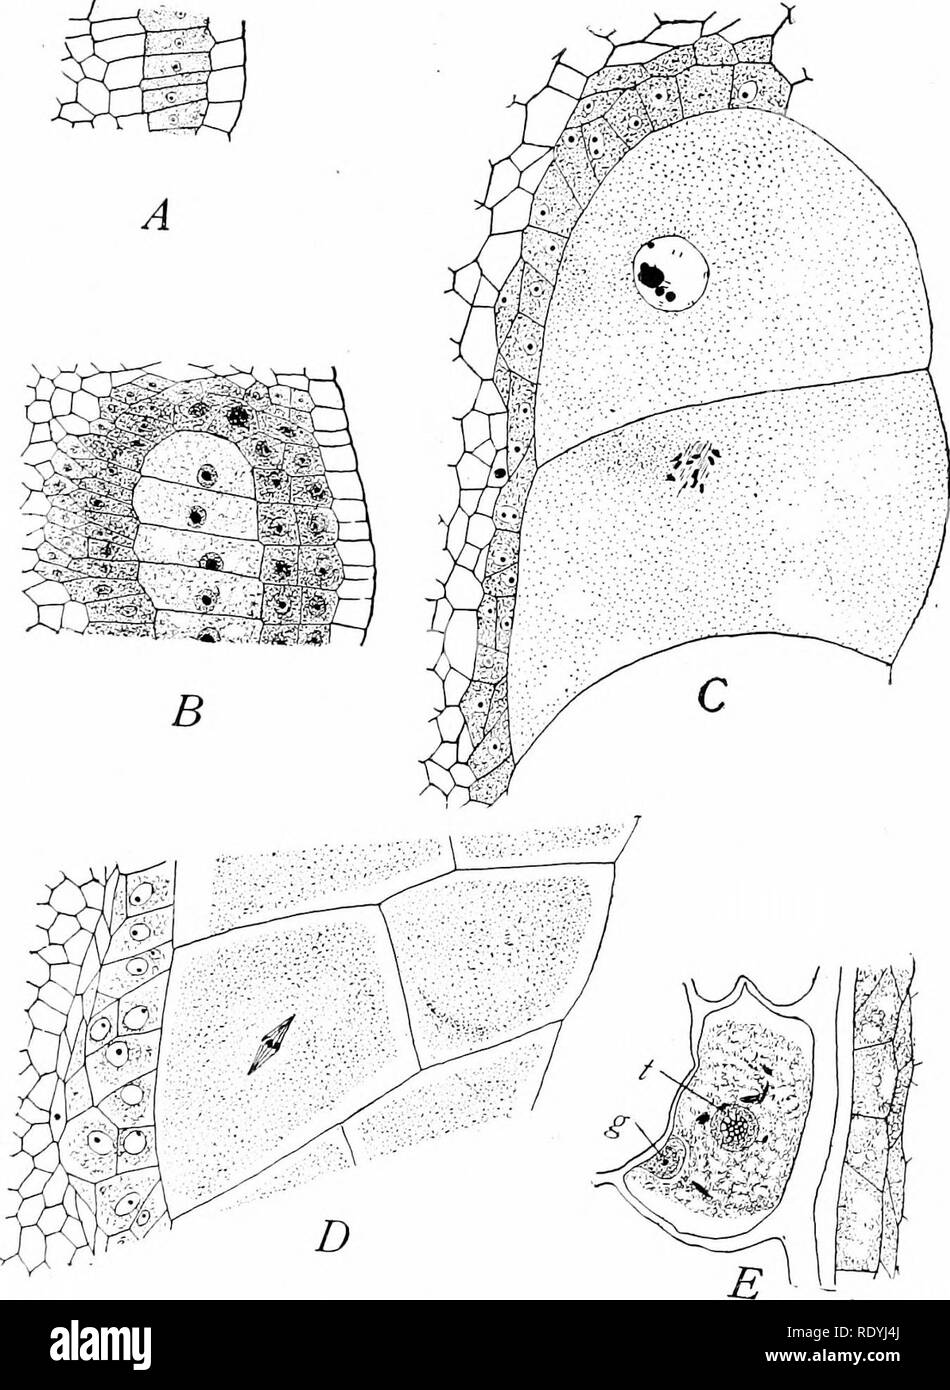 . Morphology of angiosperms (Morphology of spermatophytes. Part II). Angiosperms; Plant morphology. Fig. 58.—Development of male gametophyte iu Aselepiae. A-B, A. Corwuti; C-E, A. tuberosa. A, section of young microsporangium showing archesporial cells; B, portion of the single layer of elongated, mother-cells; C later stage showing two mother-cells, the lower one dividing and showing 10 chromosomes, the gametophyte number; 7&gt;, second division of mother-cell, by which the row of four microspores is formed; F, microspore showing tube nucleus (t) and generative nucleus {g). A, x 200 ; B-E, x Stock Photo